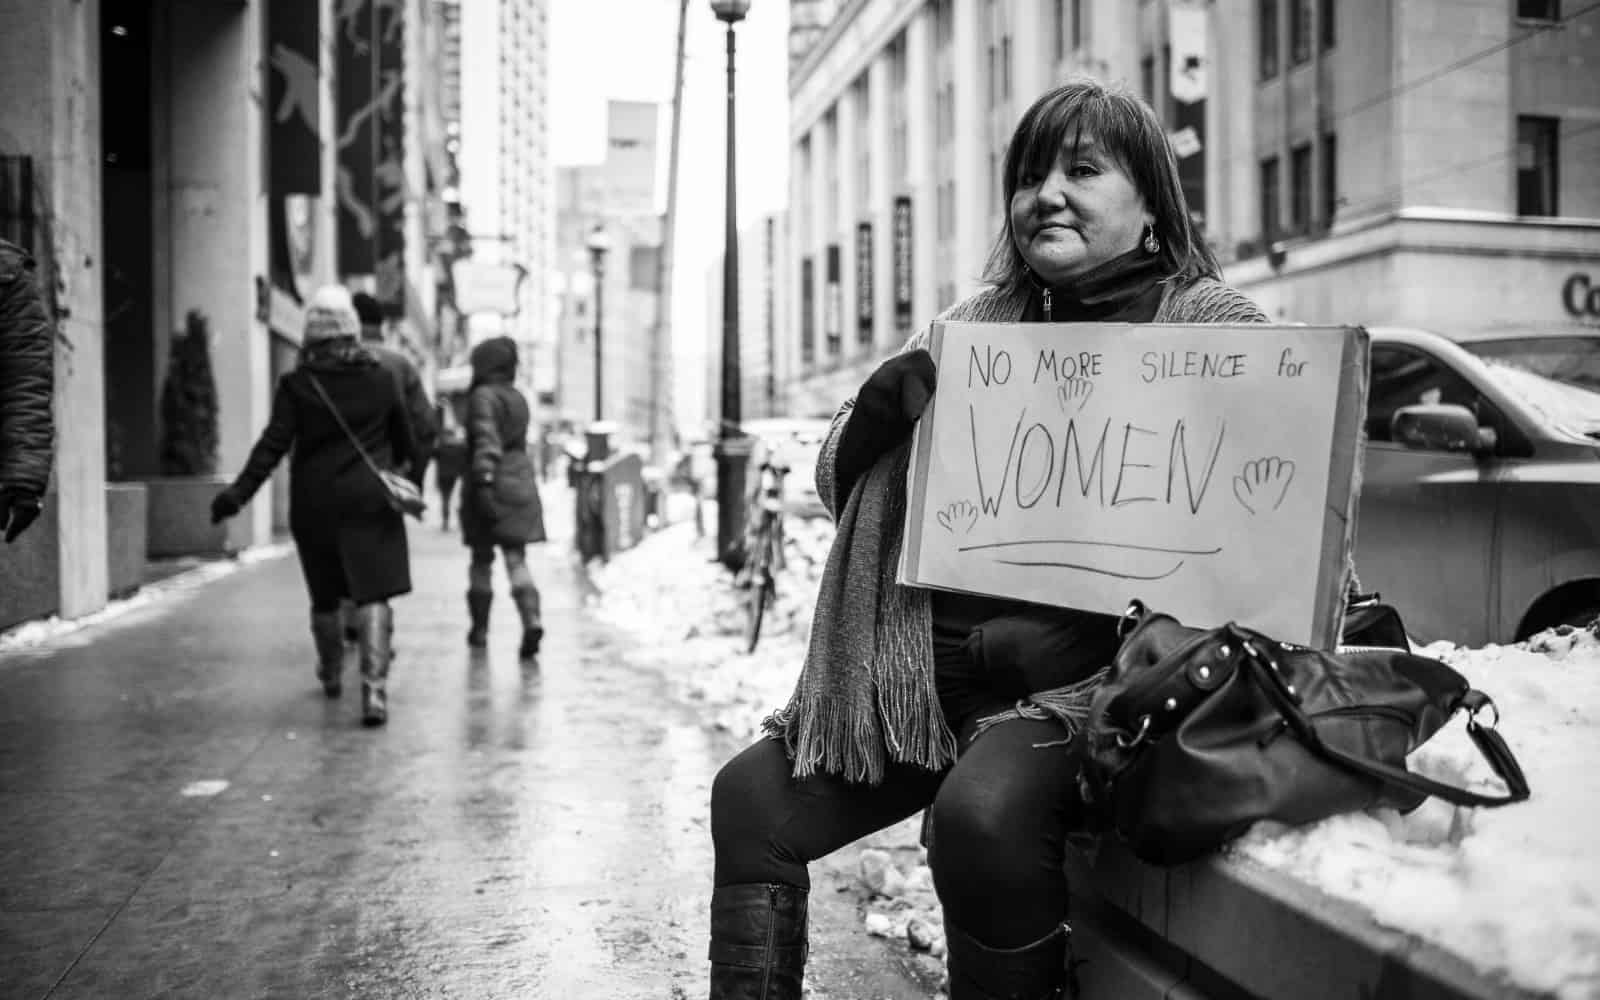 Stan Williams Image: No More Silence for Women